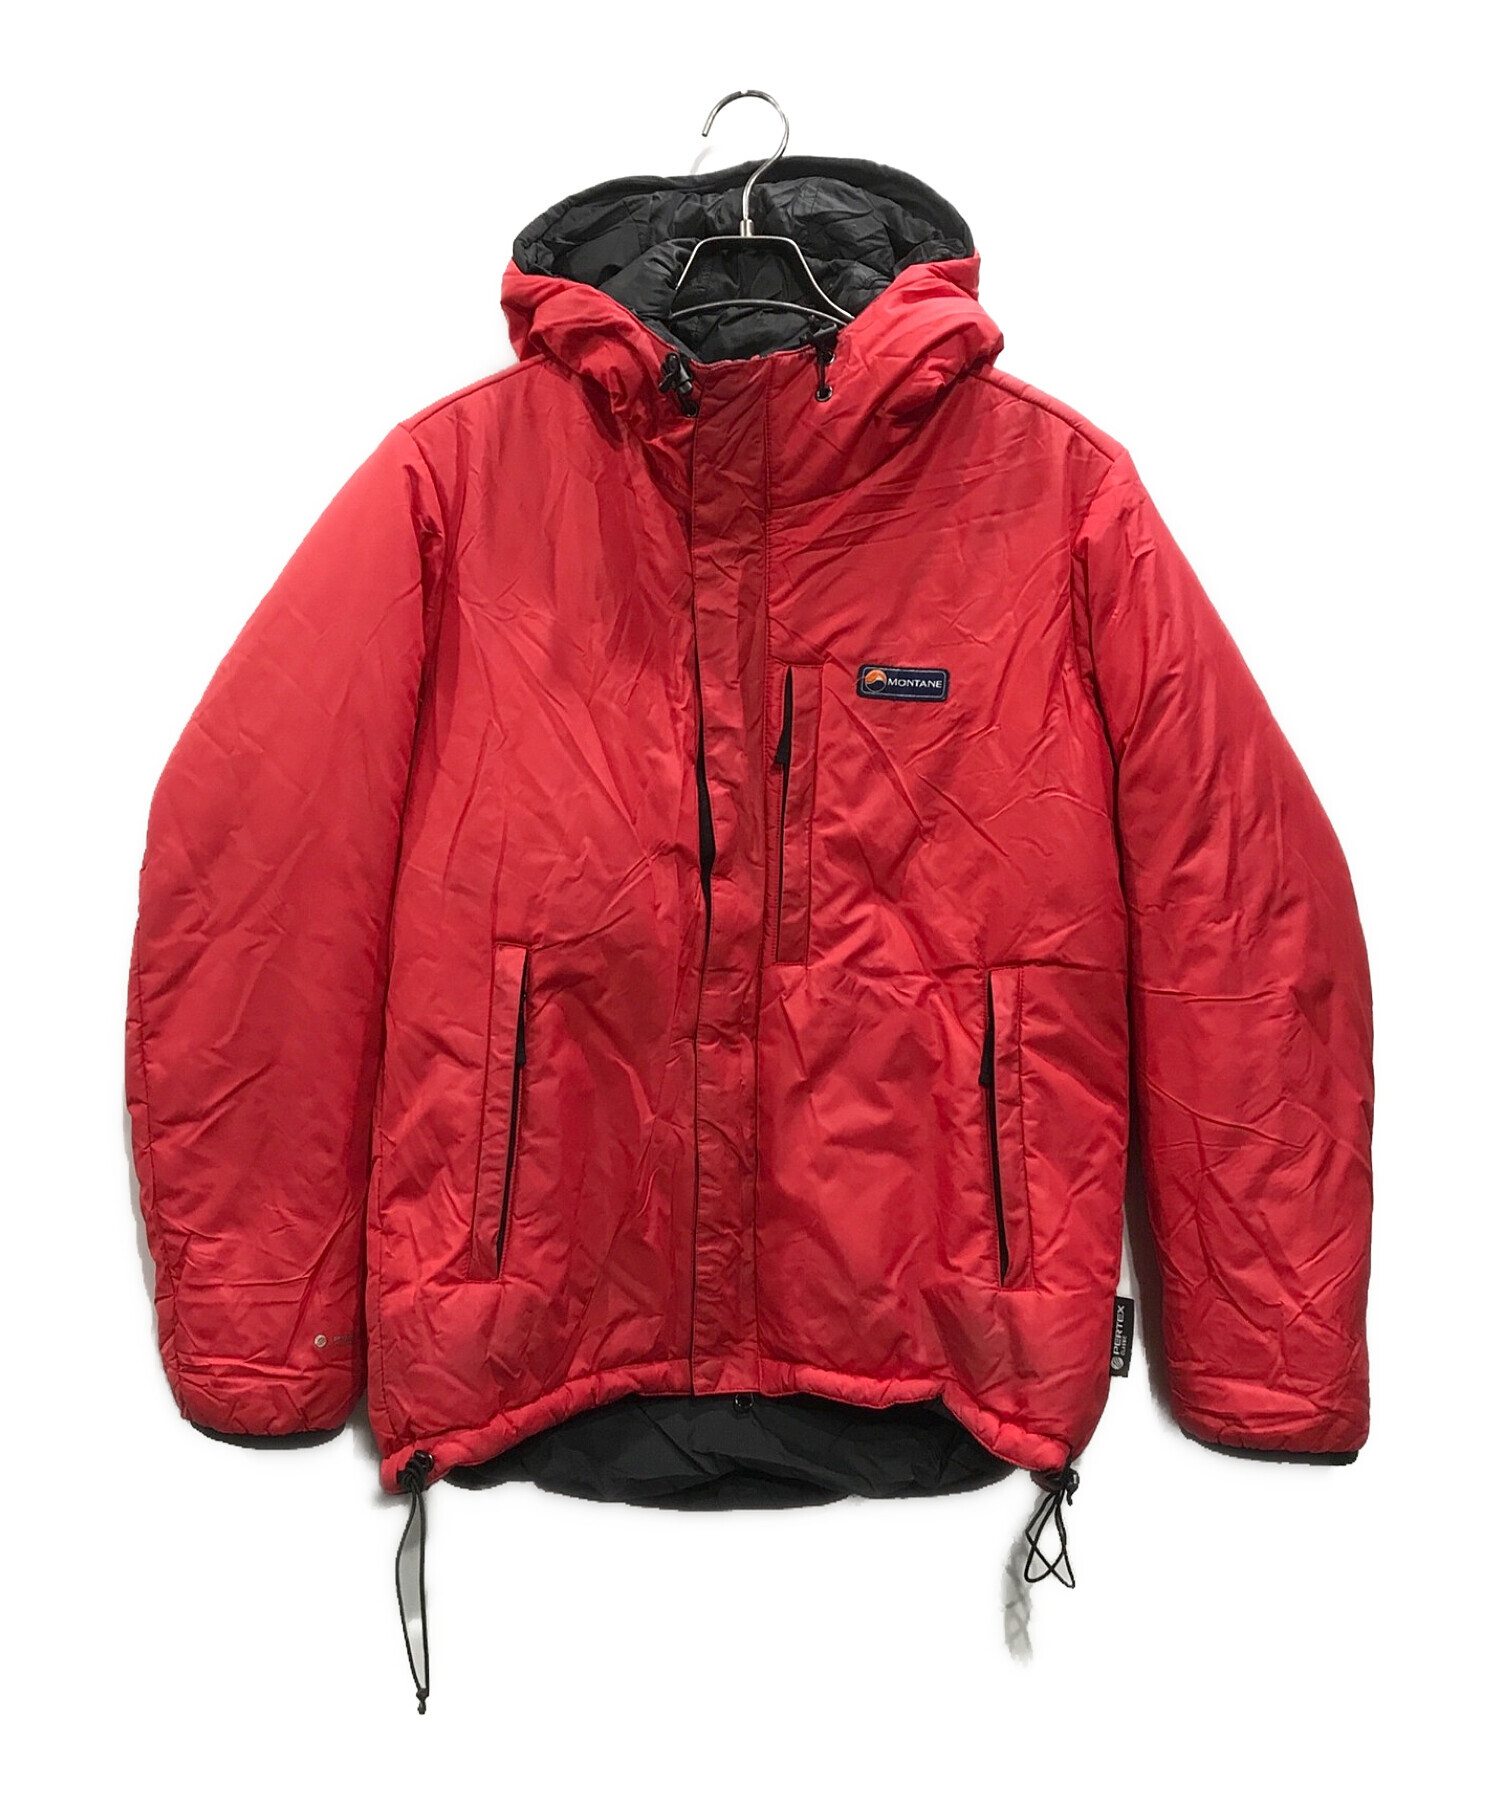 MONTANE(モンテーン) ジャケット サイズS | camillevieraservices.com